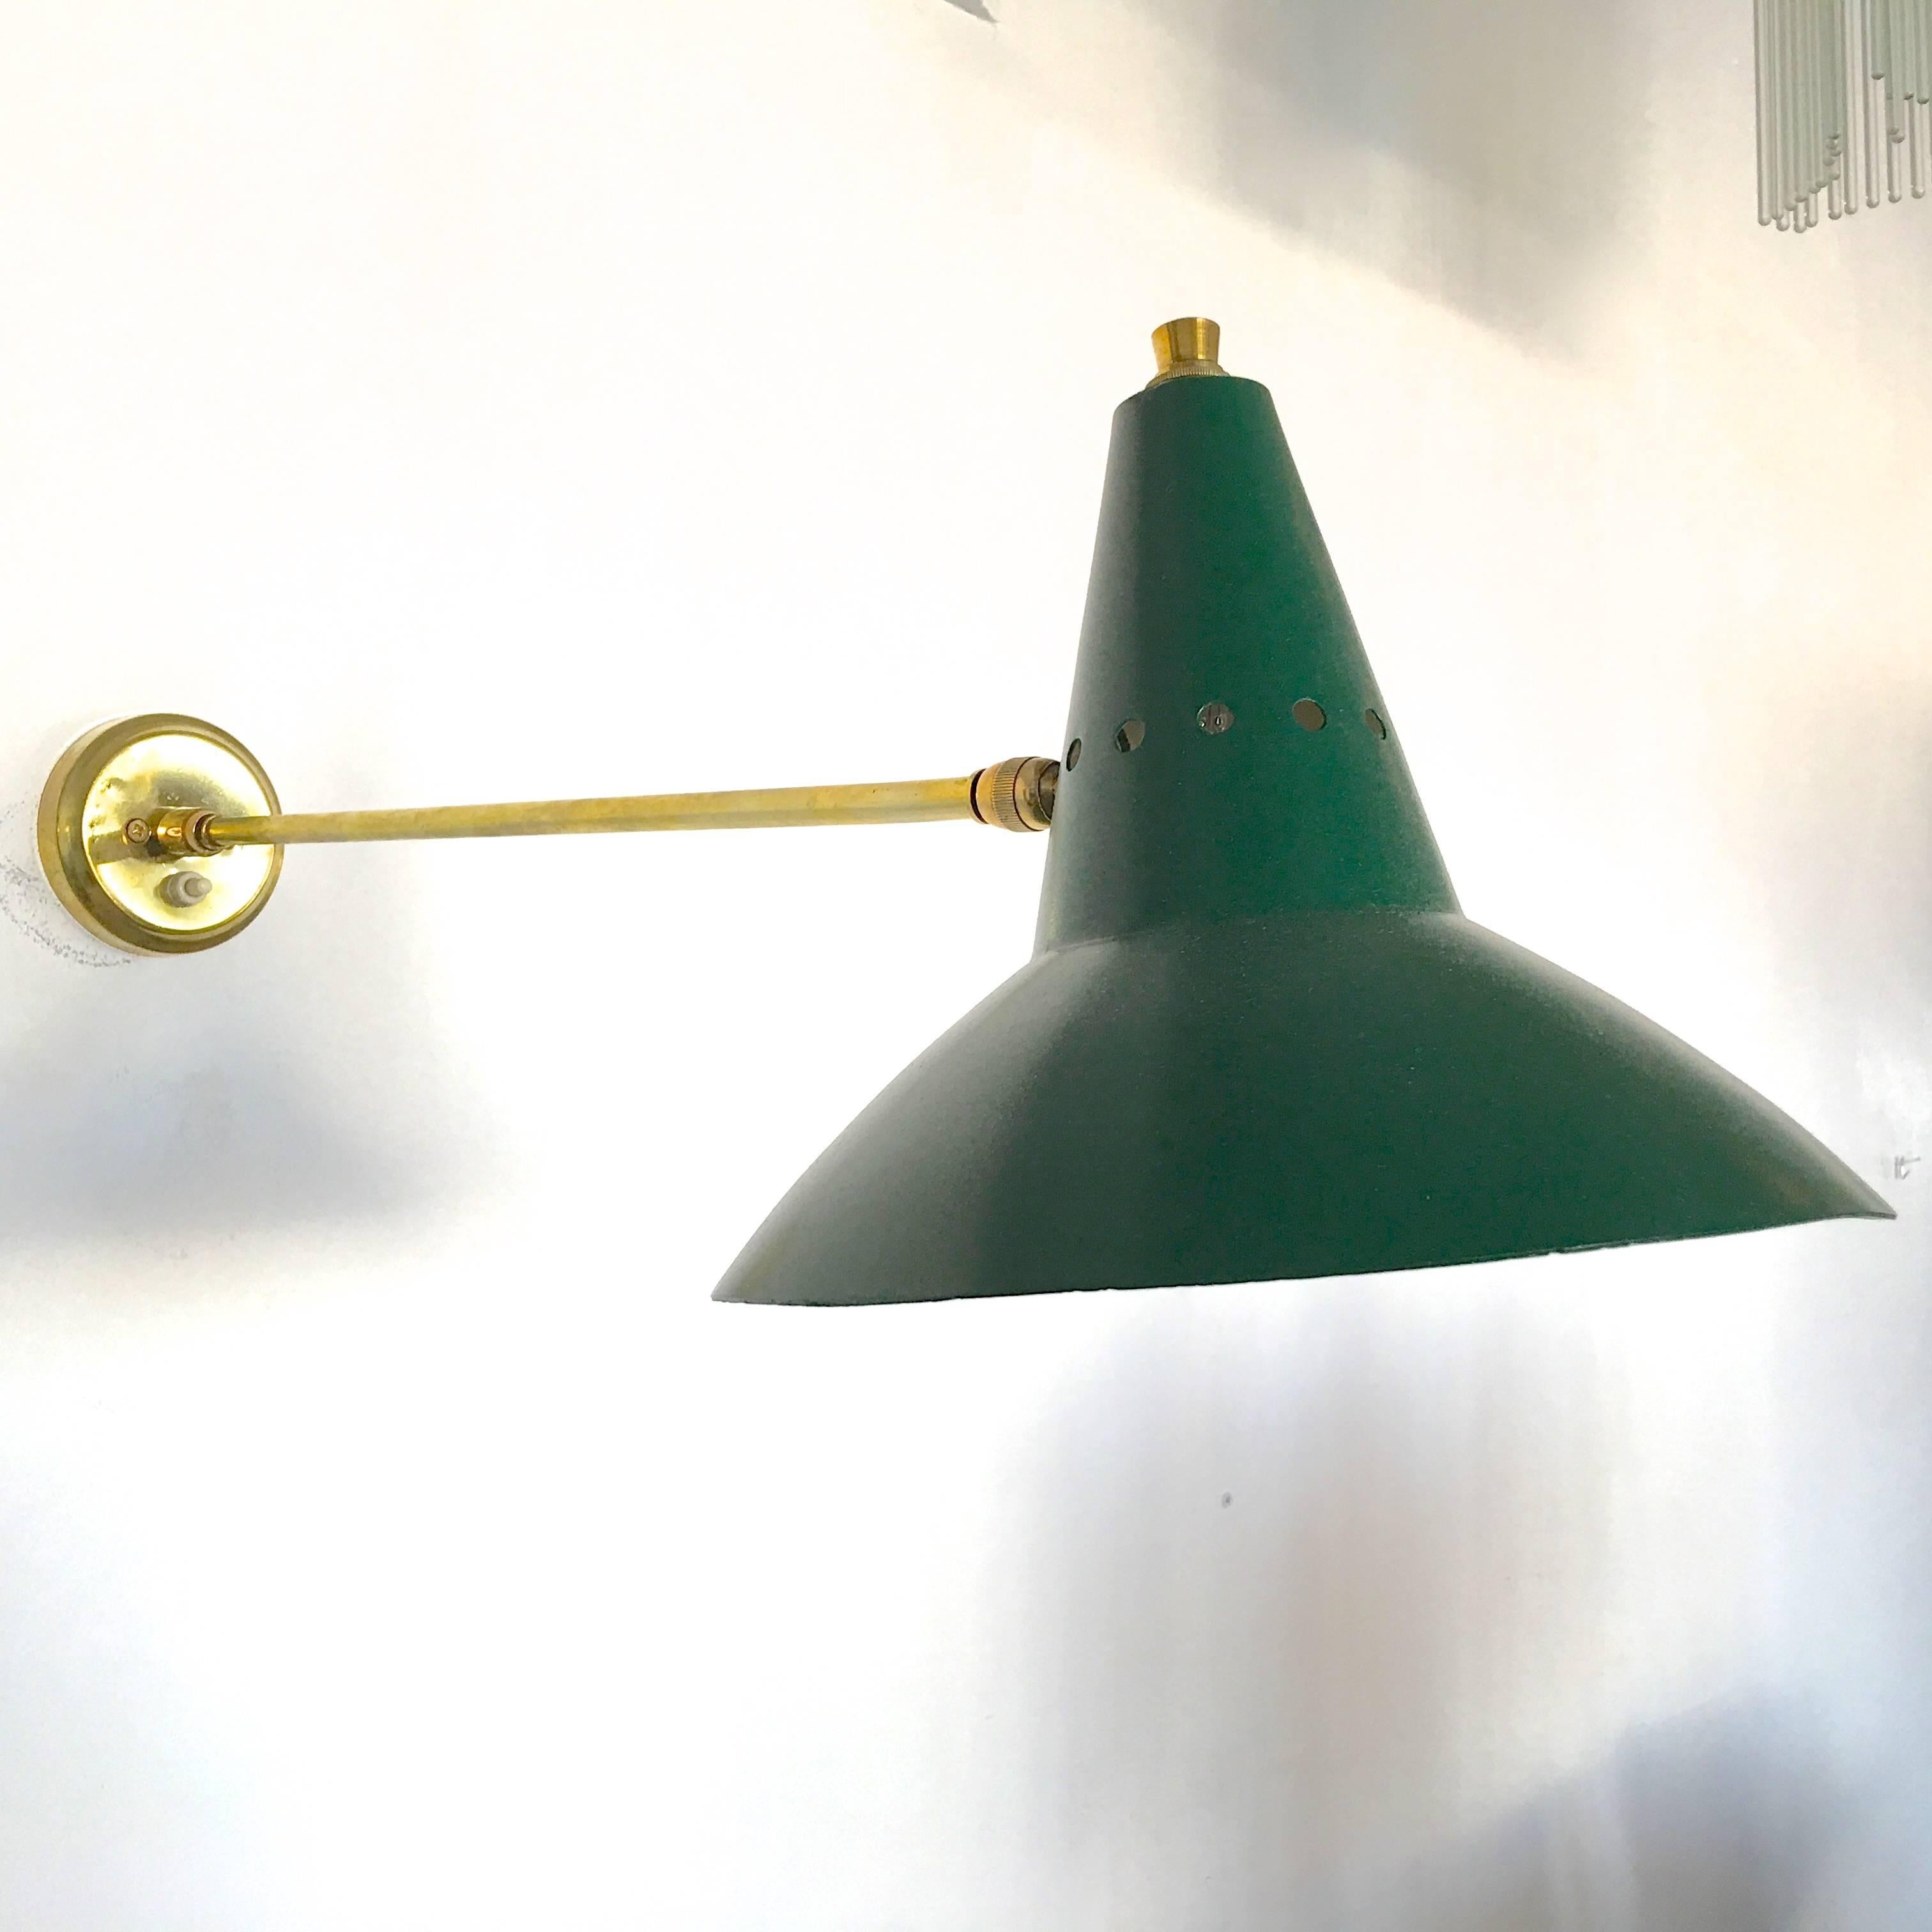 Stilnovo wall-mounted lamp with long brass arm perpendicular to the wall and articulating dark green aluminium shade. Push button on-off switch on mounting plate. Rewired for USA with a single E12 socket for a candelabra size bulb up to 75